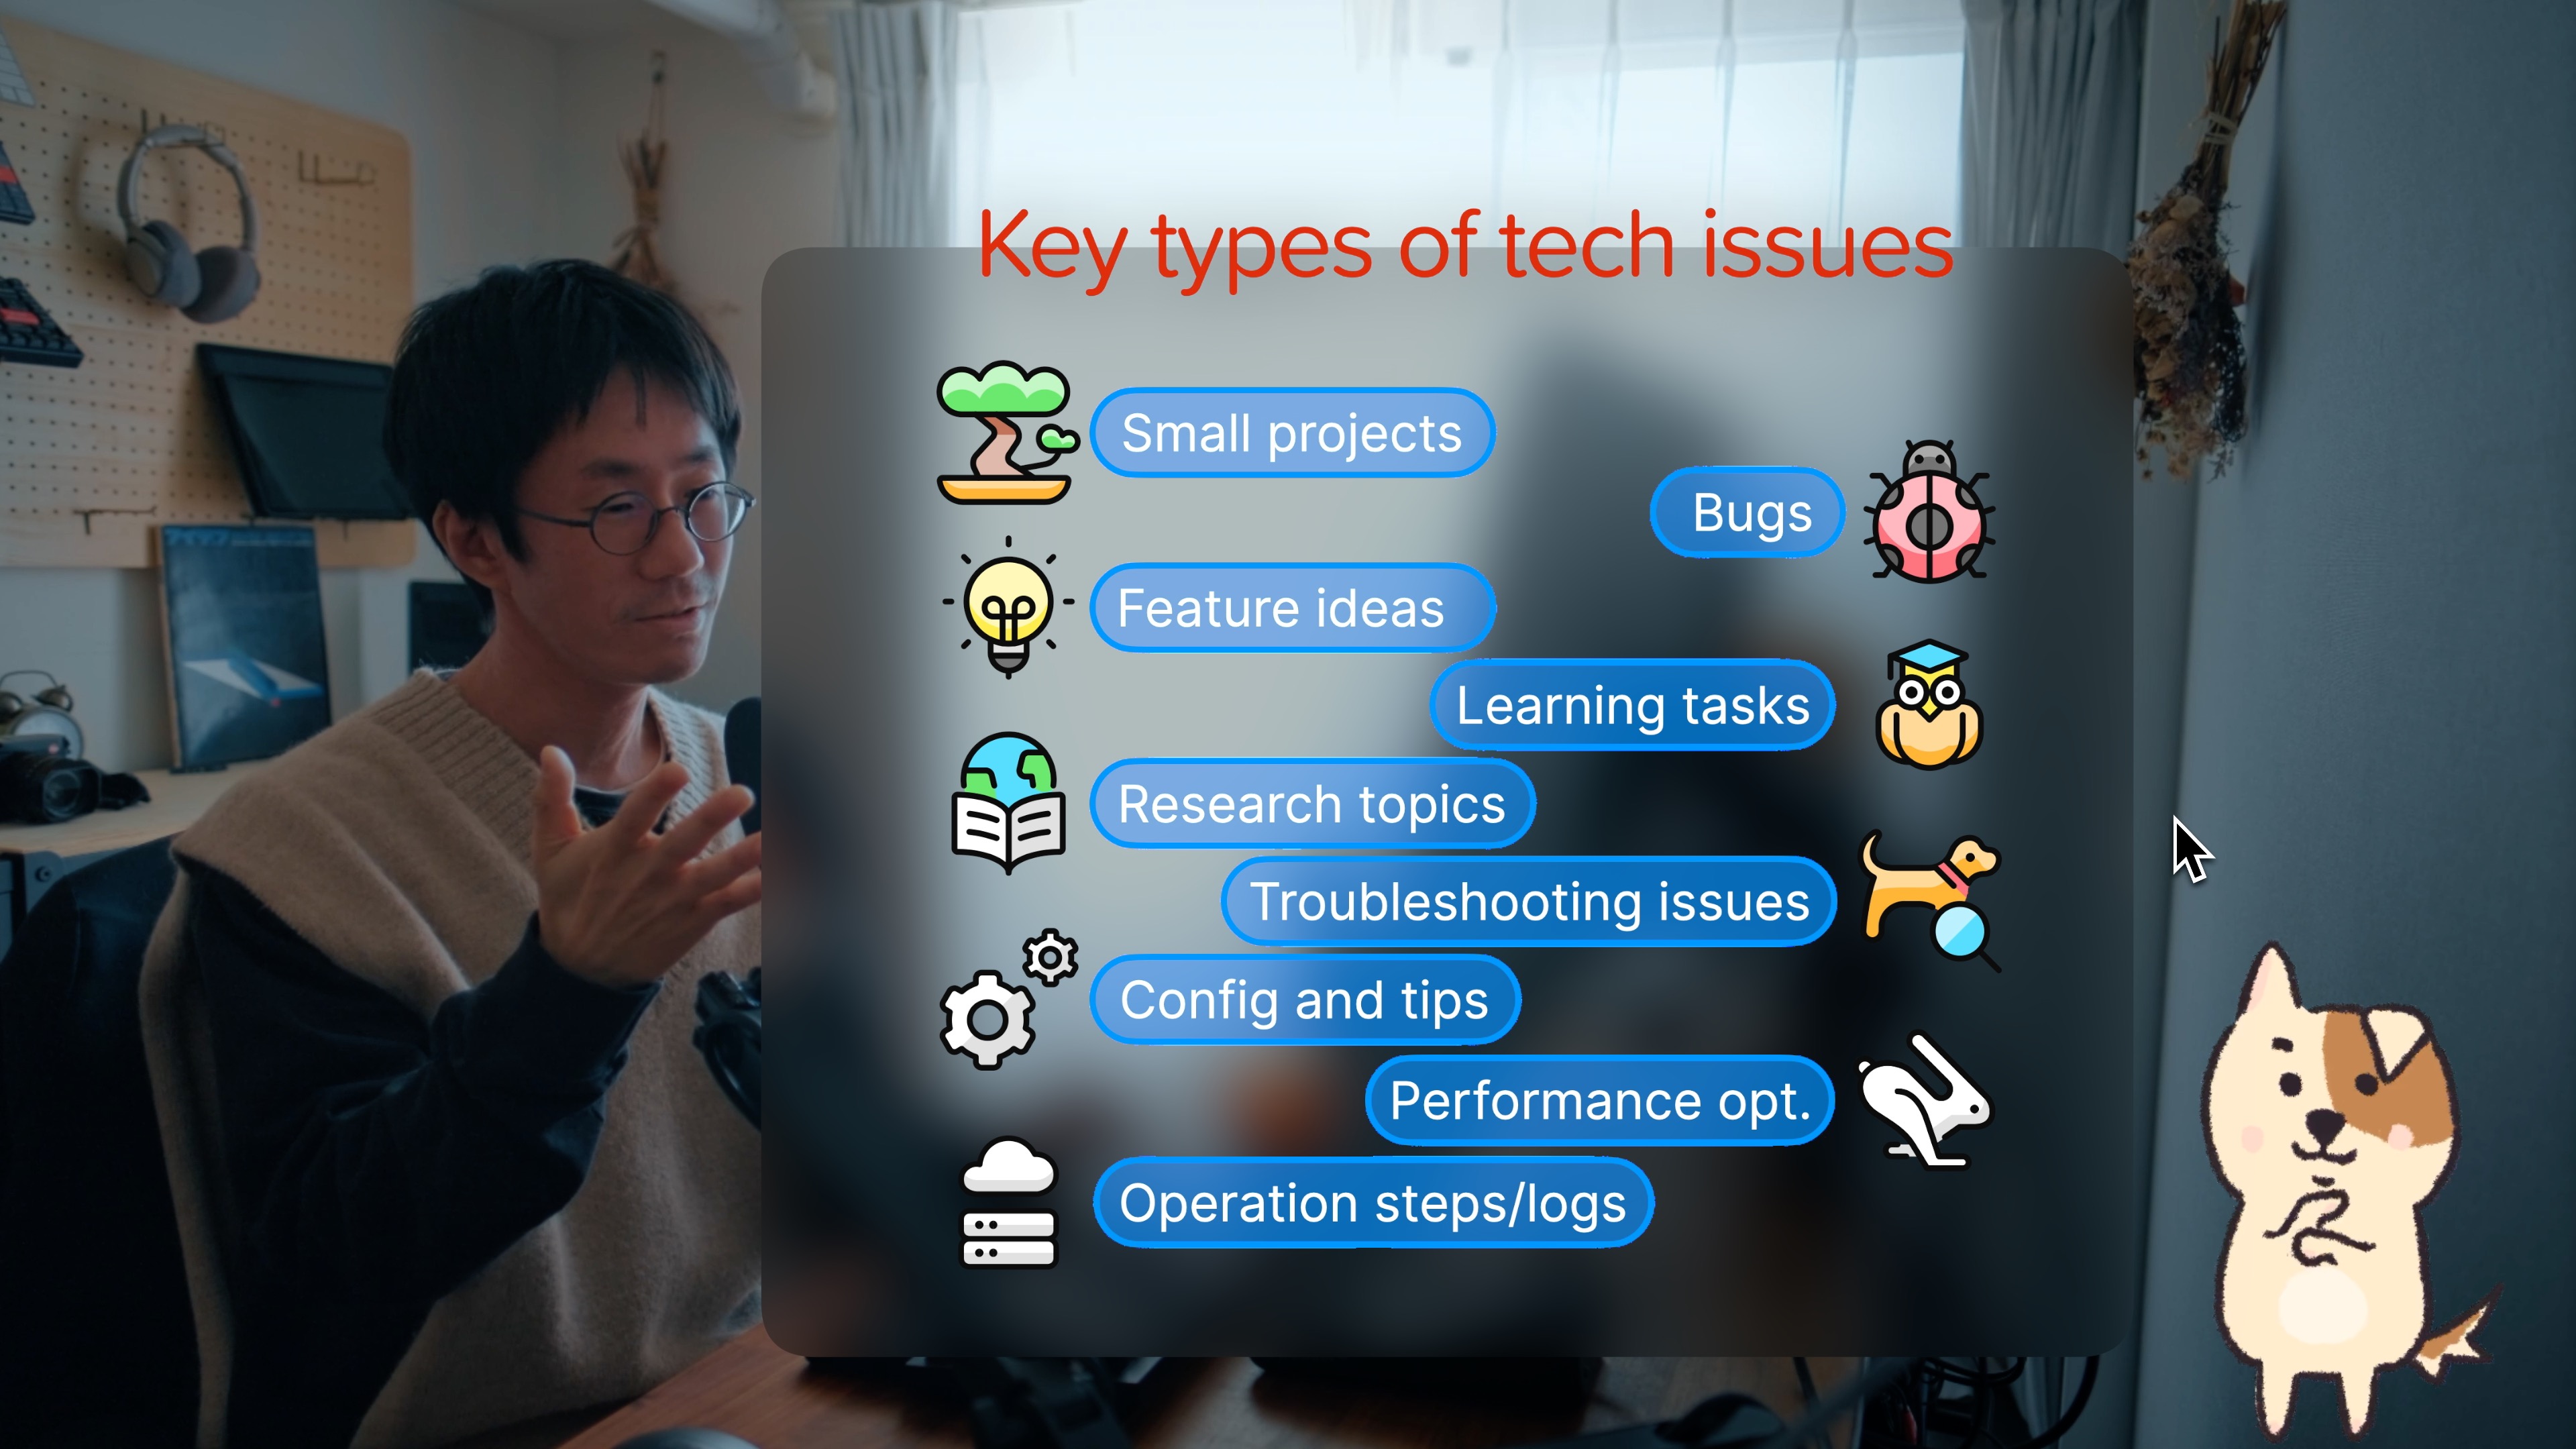 Key types of tech issues